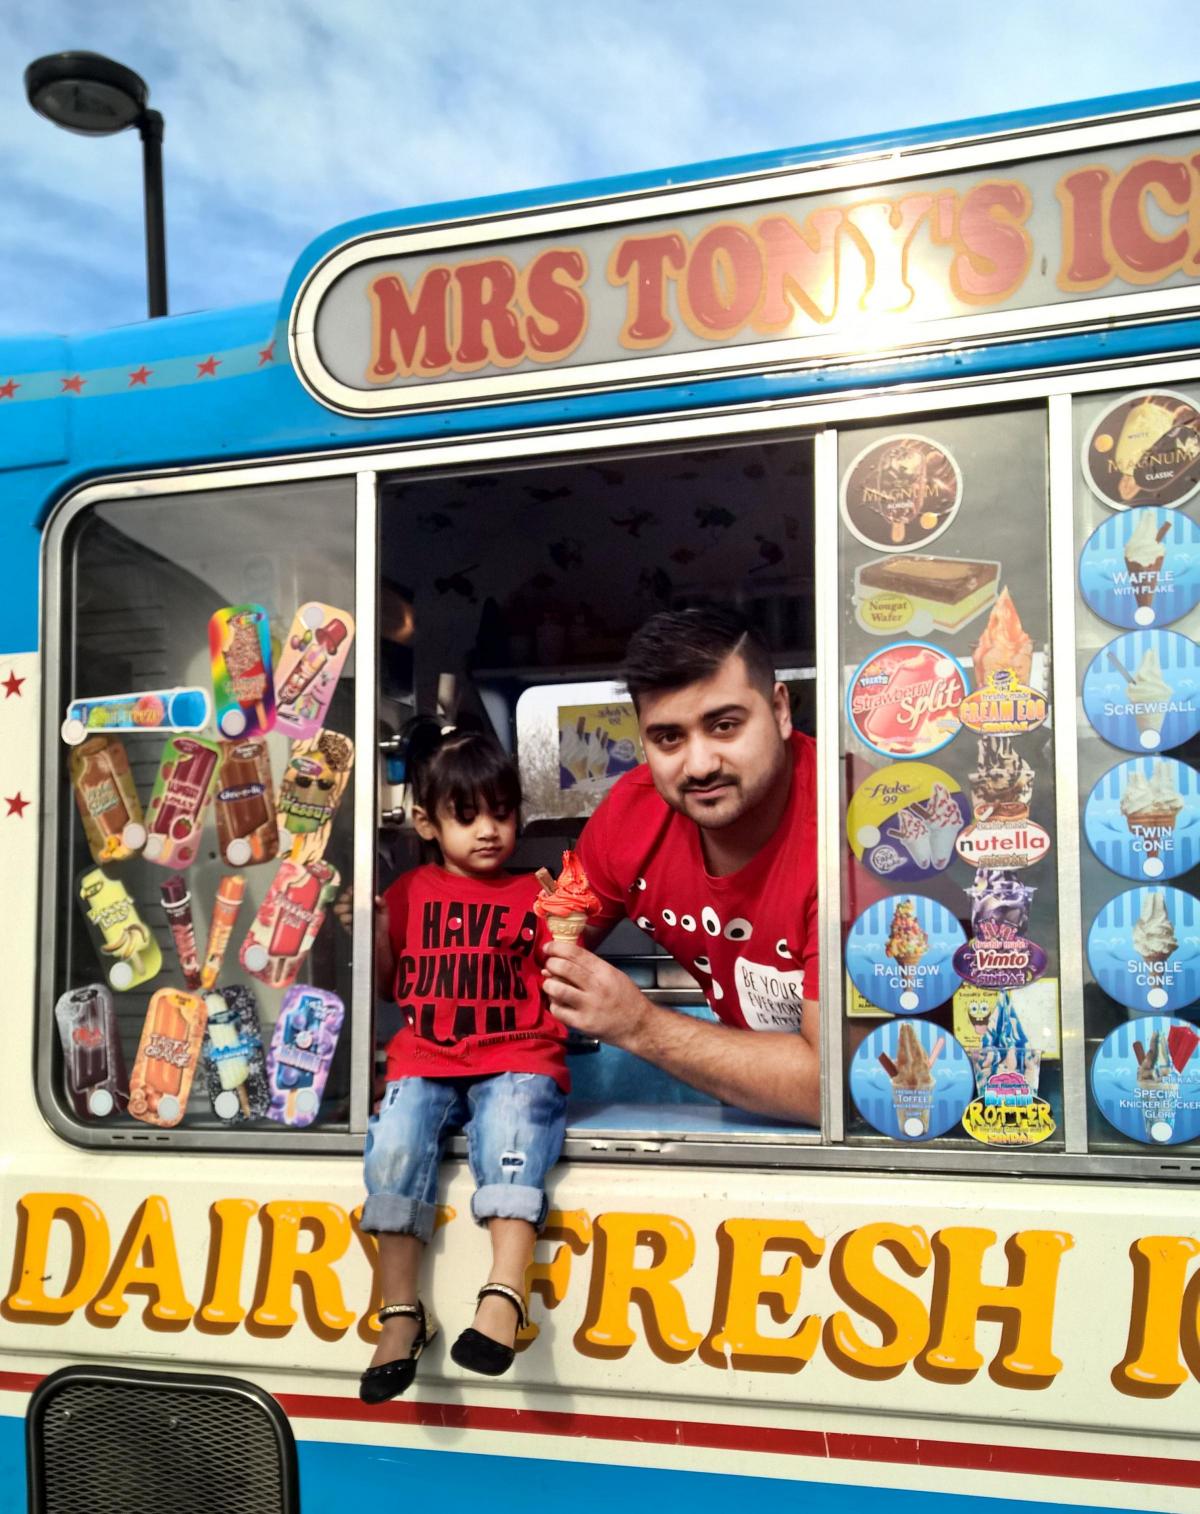 Naheem Uddin, with his daughter Shanaiya, who is donating 10% of his profits to Comic Relief from selling special red ice creams